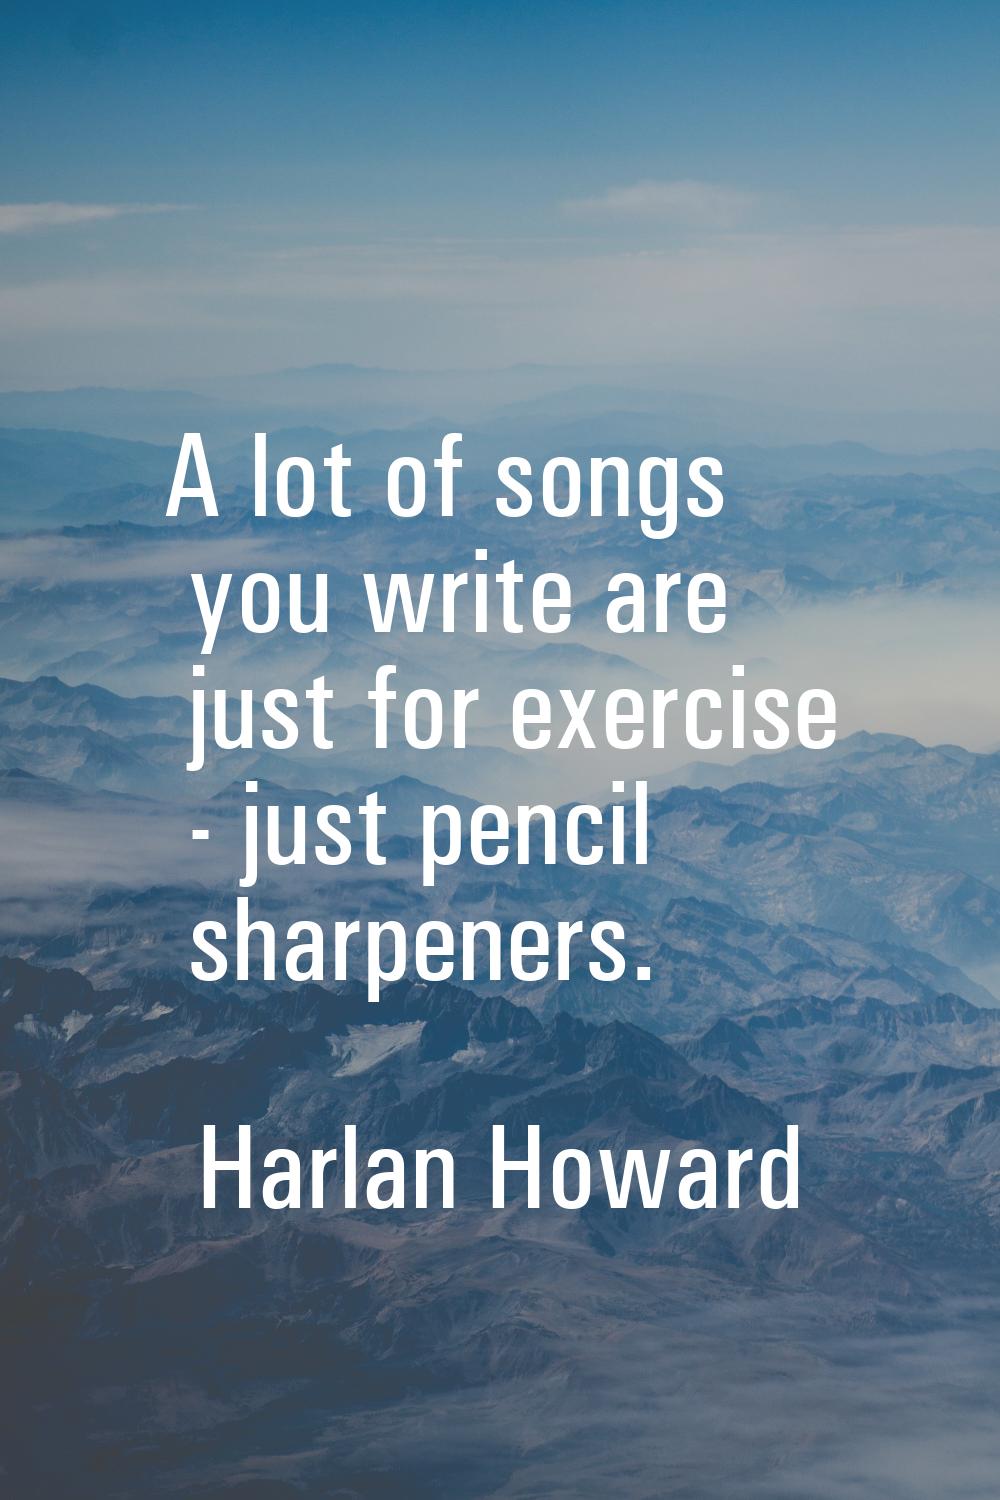 A lot of songs you write are just for exercise - just pencil sharpeners.